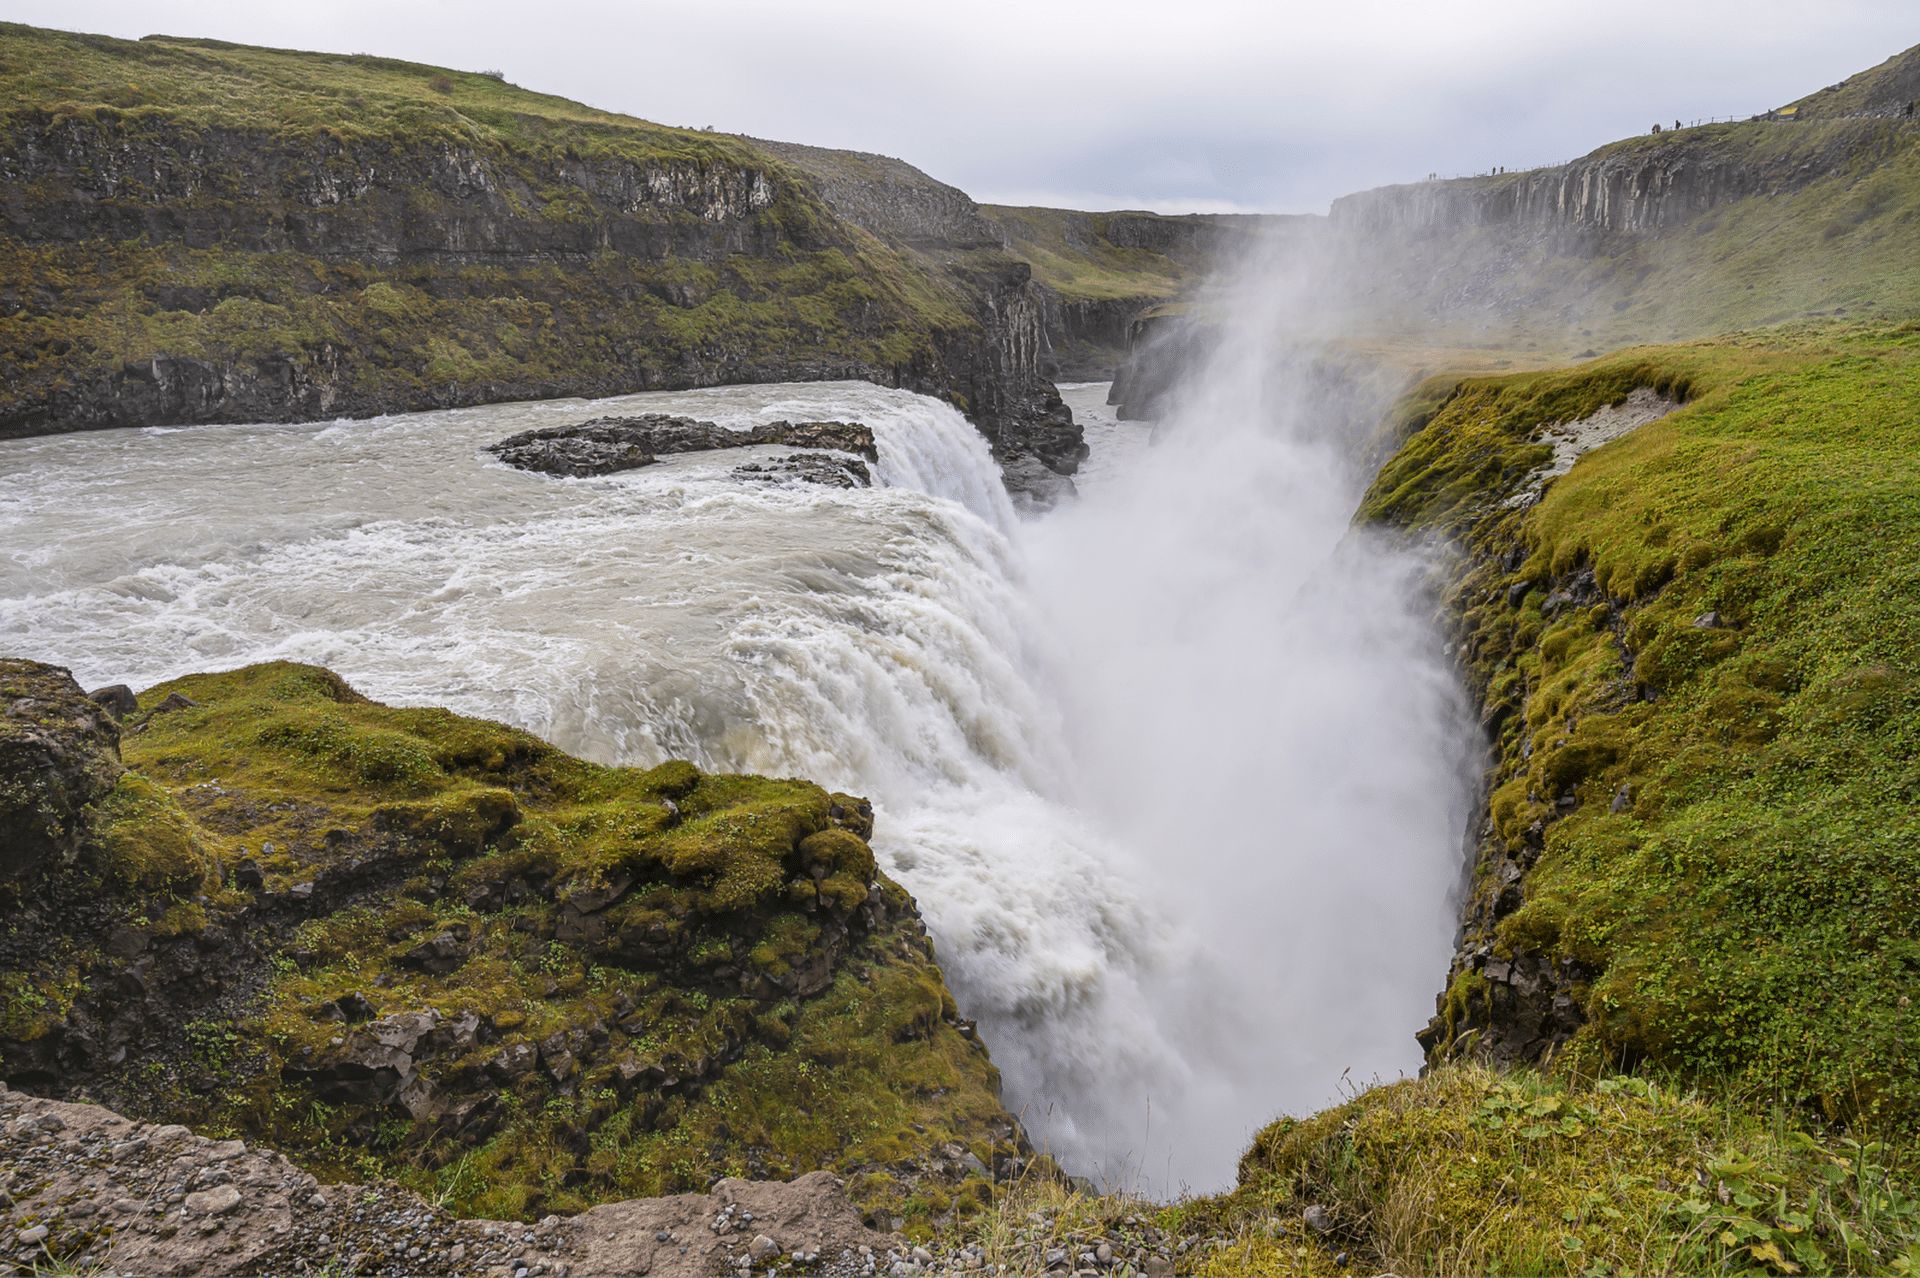 Gullfoss waterfall shows nature at its most magnificently powerful